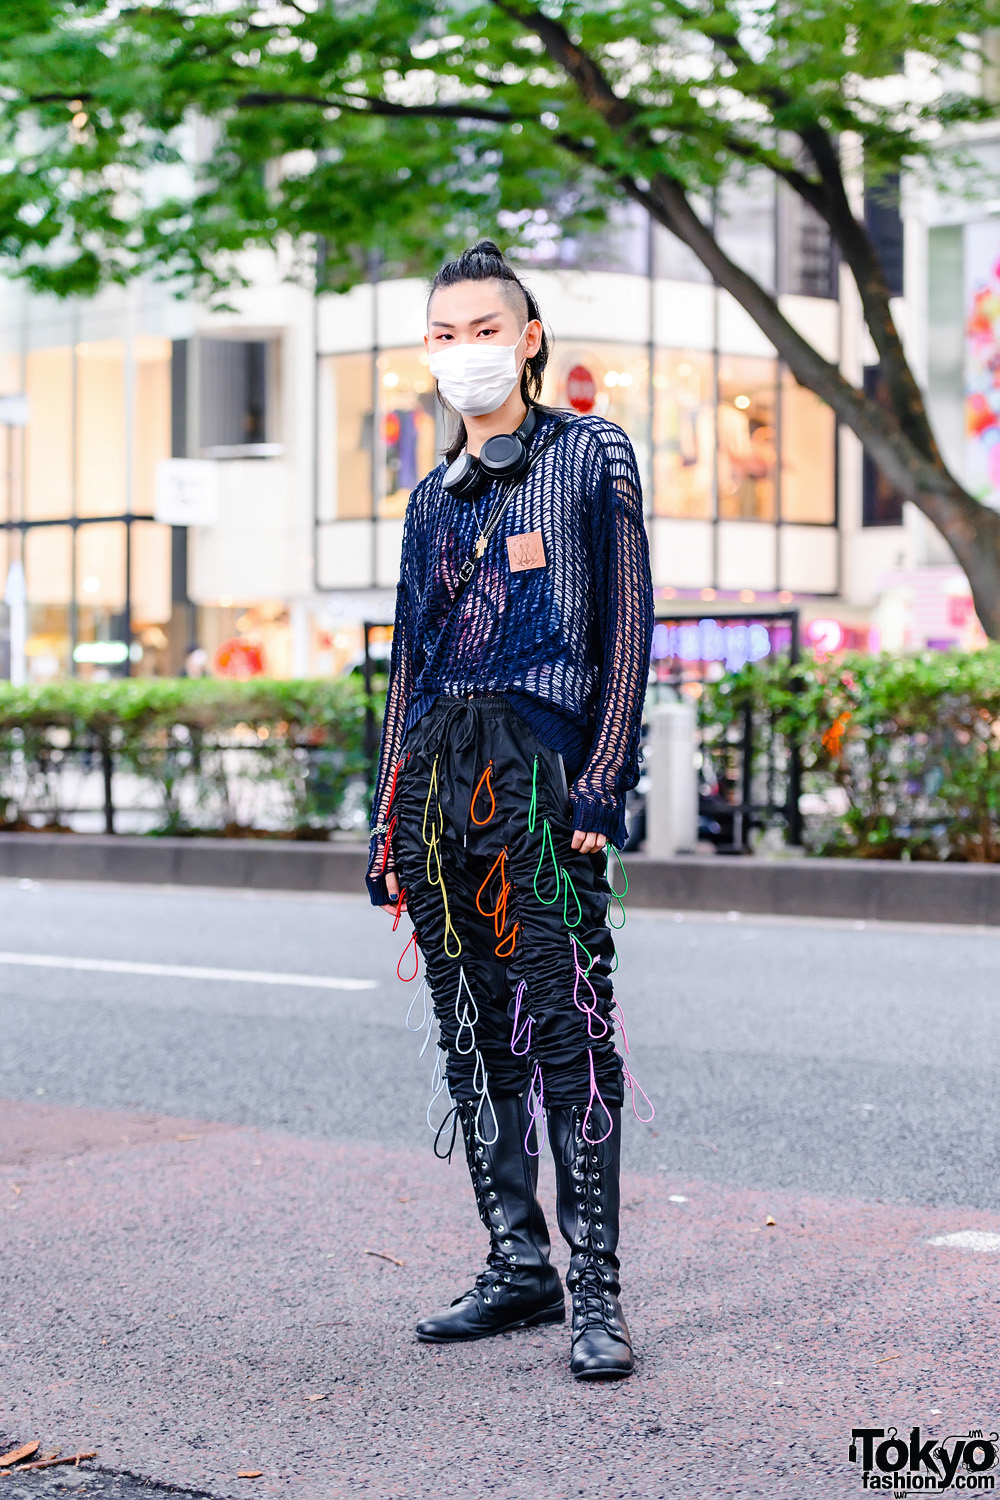 Harajuku Student w/ Top Knot Hairstyle in M.Y.O.B Loose Knit Sweater, EPTM Gather Pants, Lace-Up Tall Boots & Who's Who Gallery Crossbody Bag